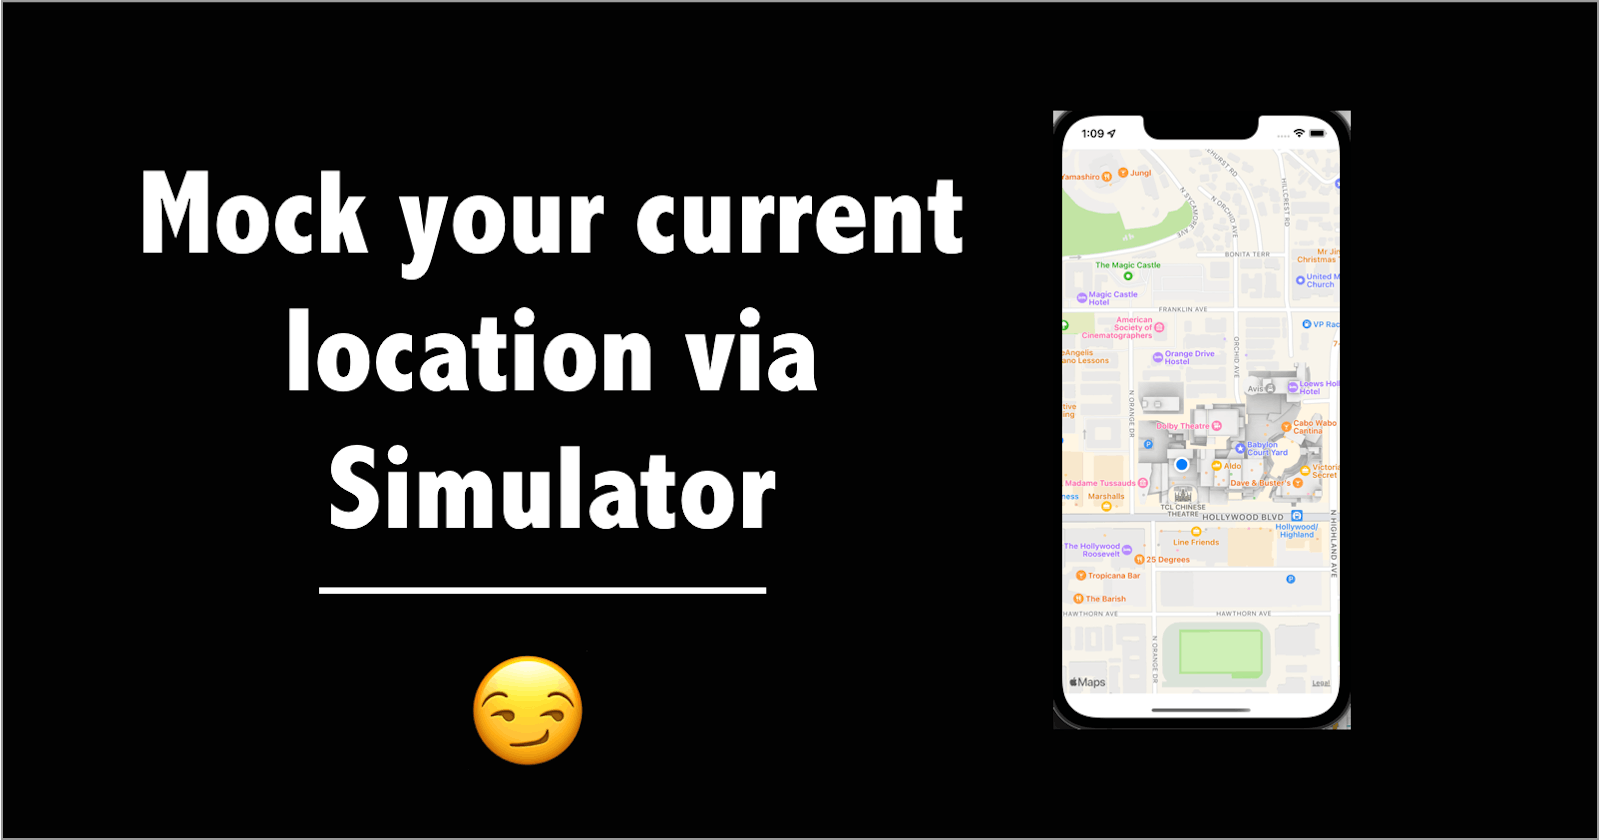 Let's mock your current location on Simulator